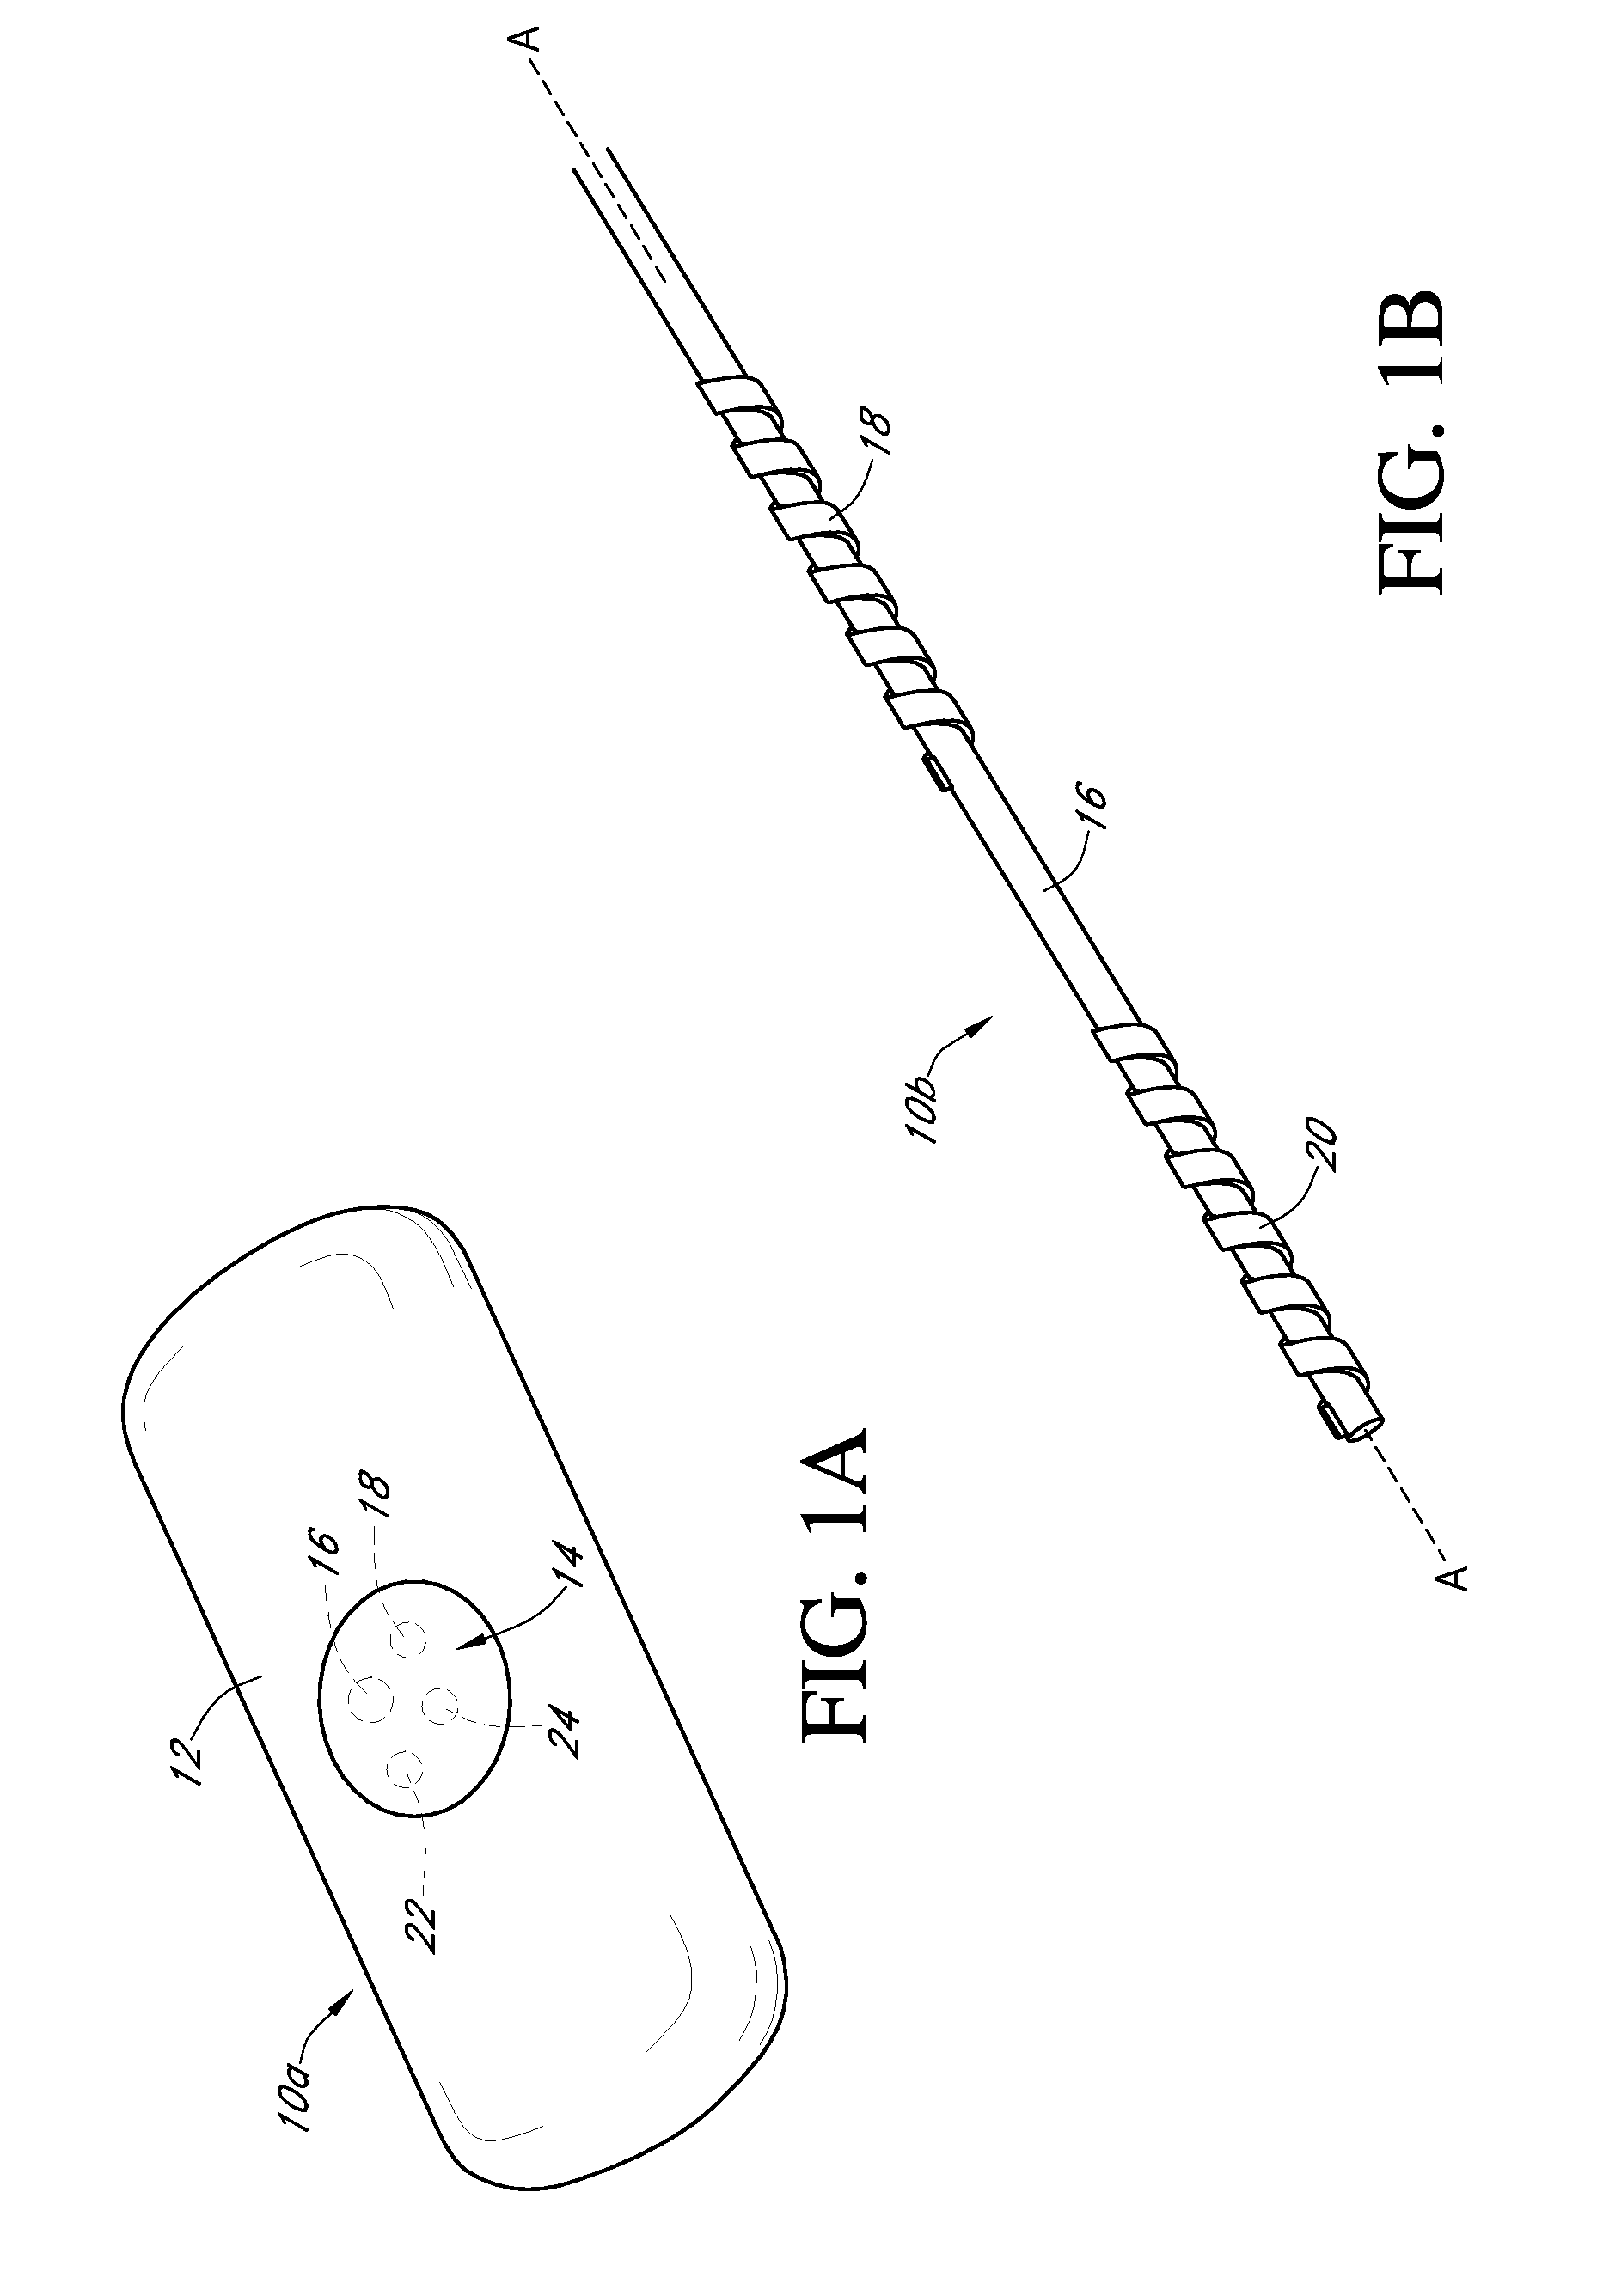 Dual electrode system for a continuous analyte sensor